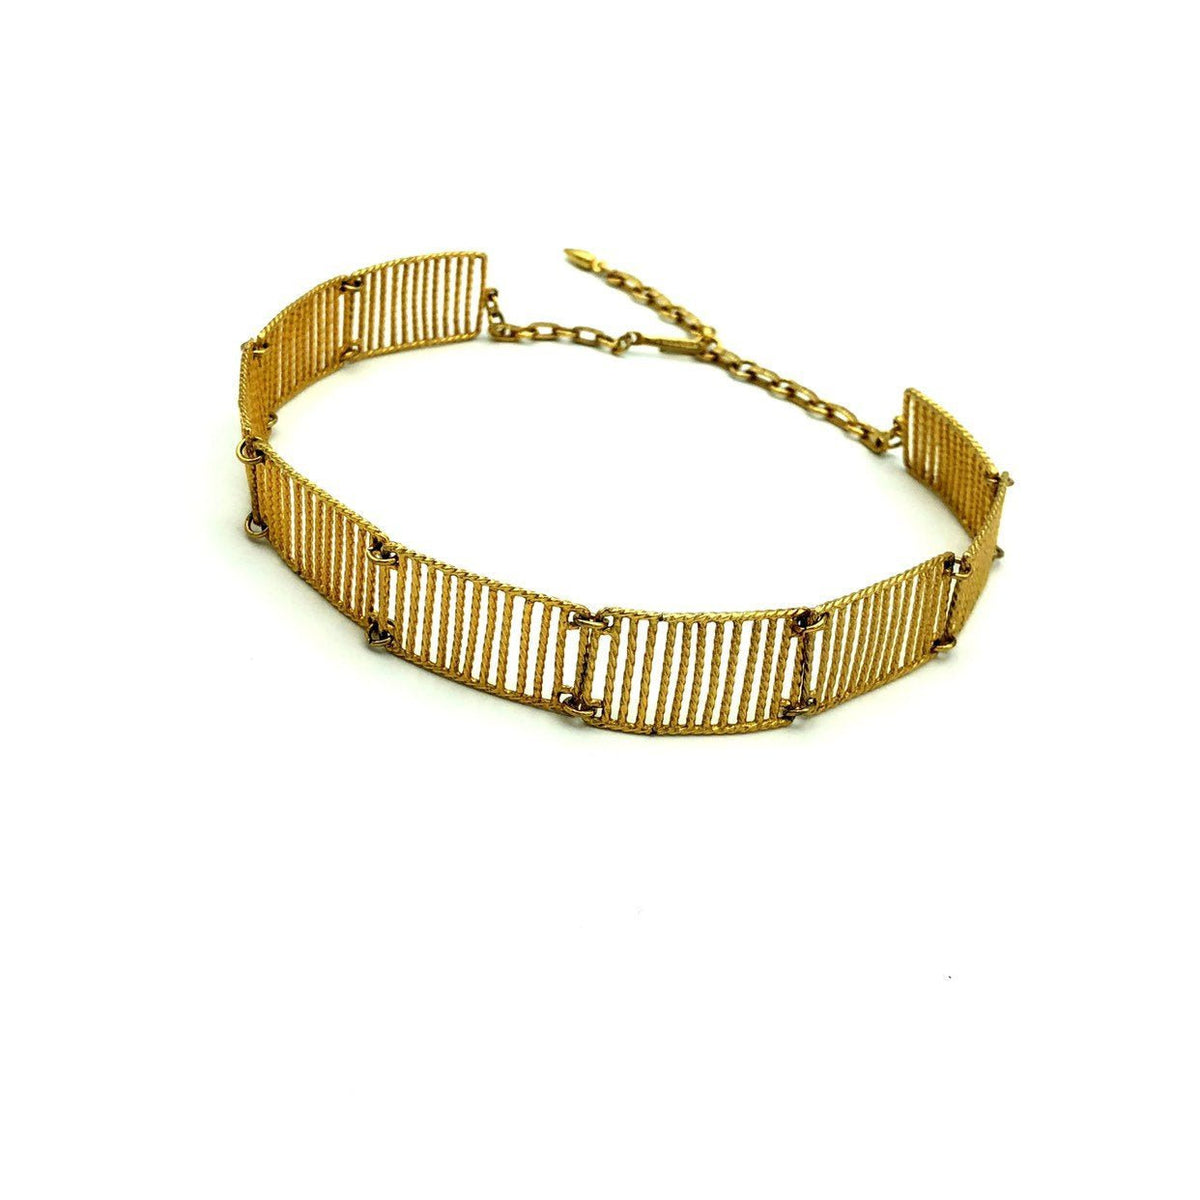 Vintage Vendome Gold Link Collar Necklace - 24 Wishes Vintage Jewelry